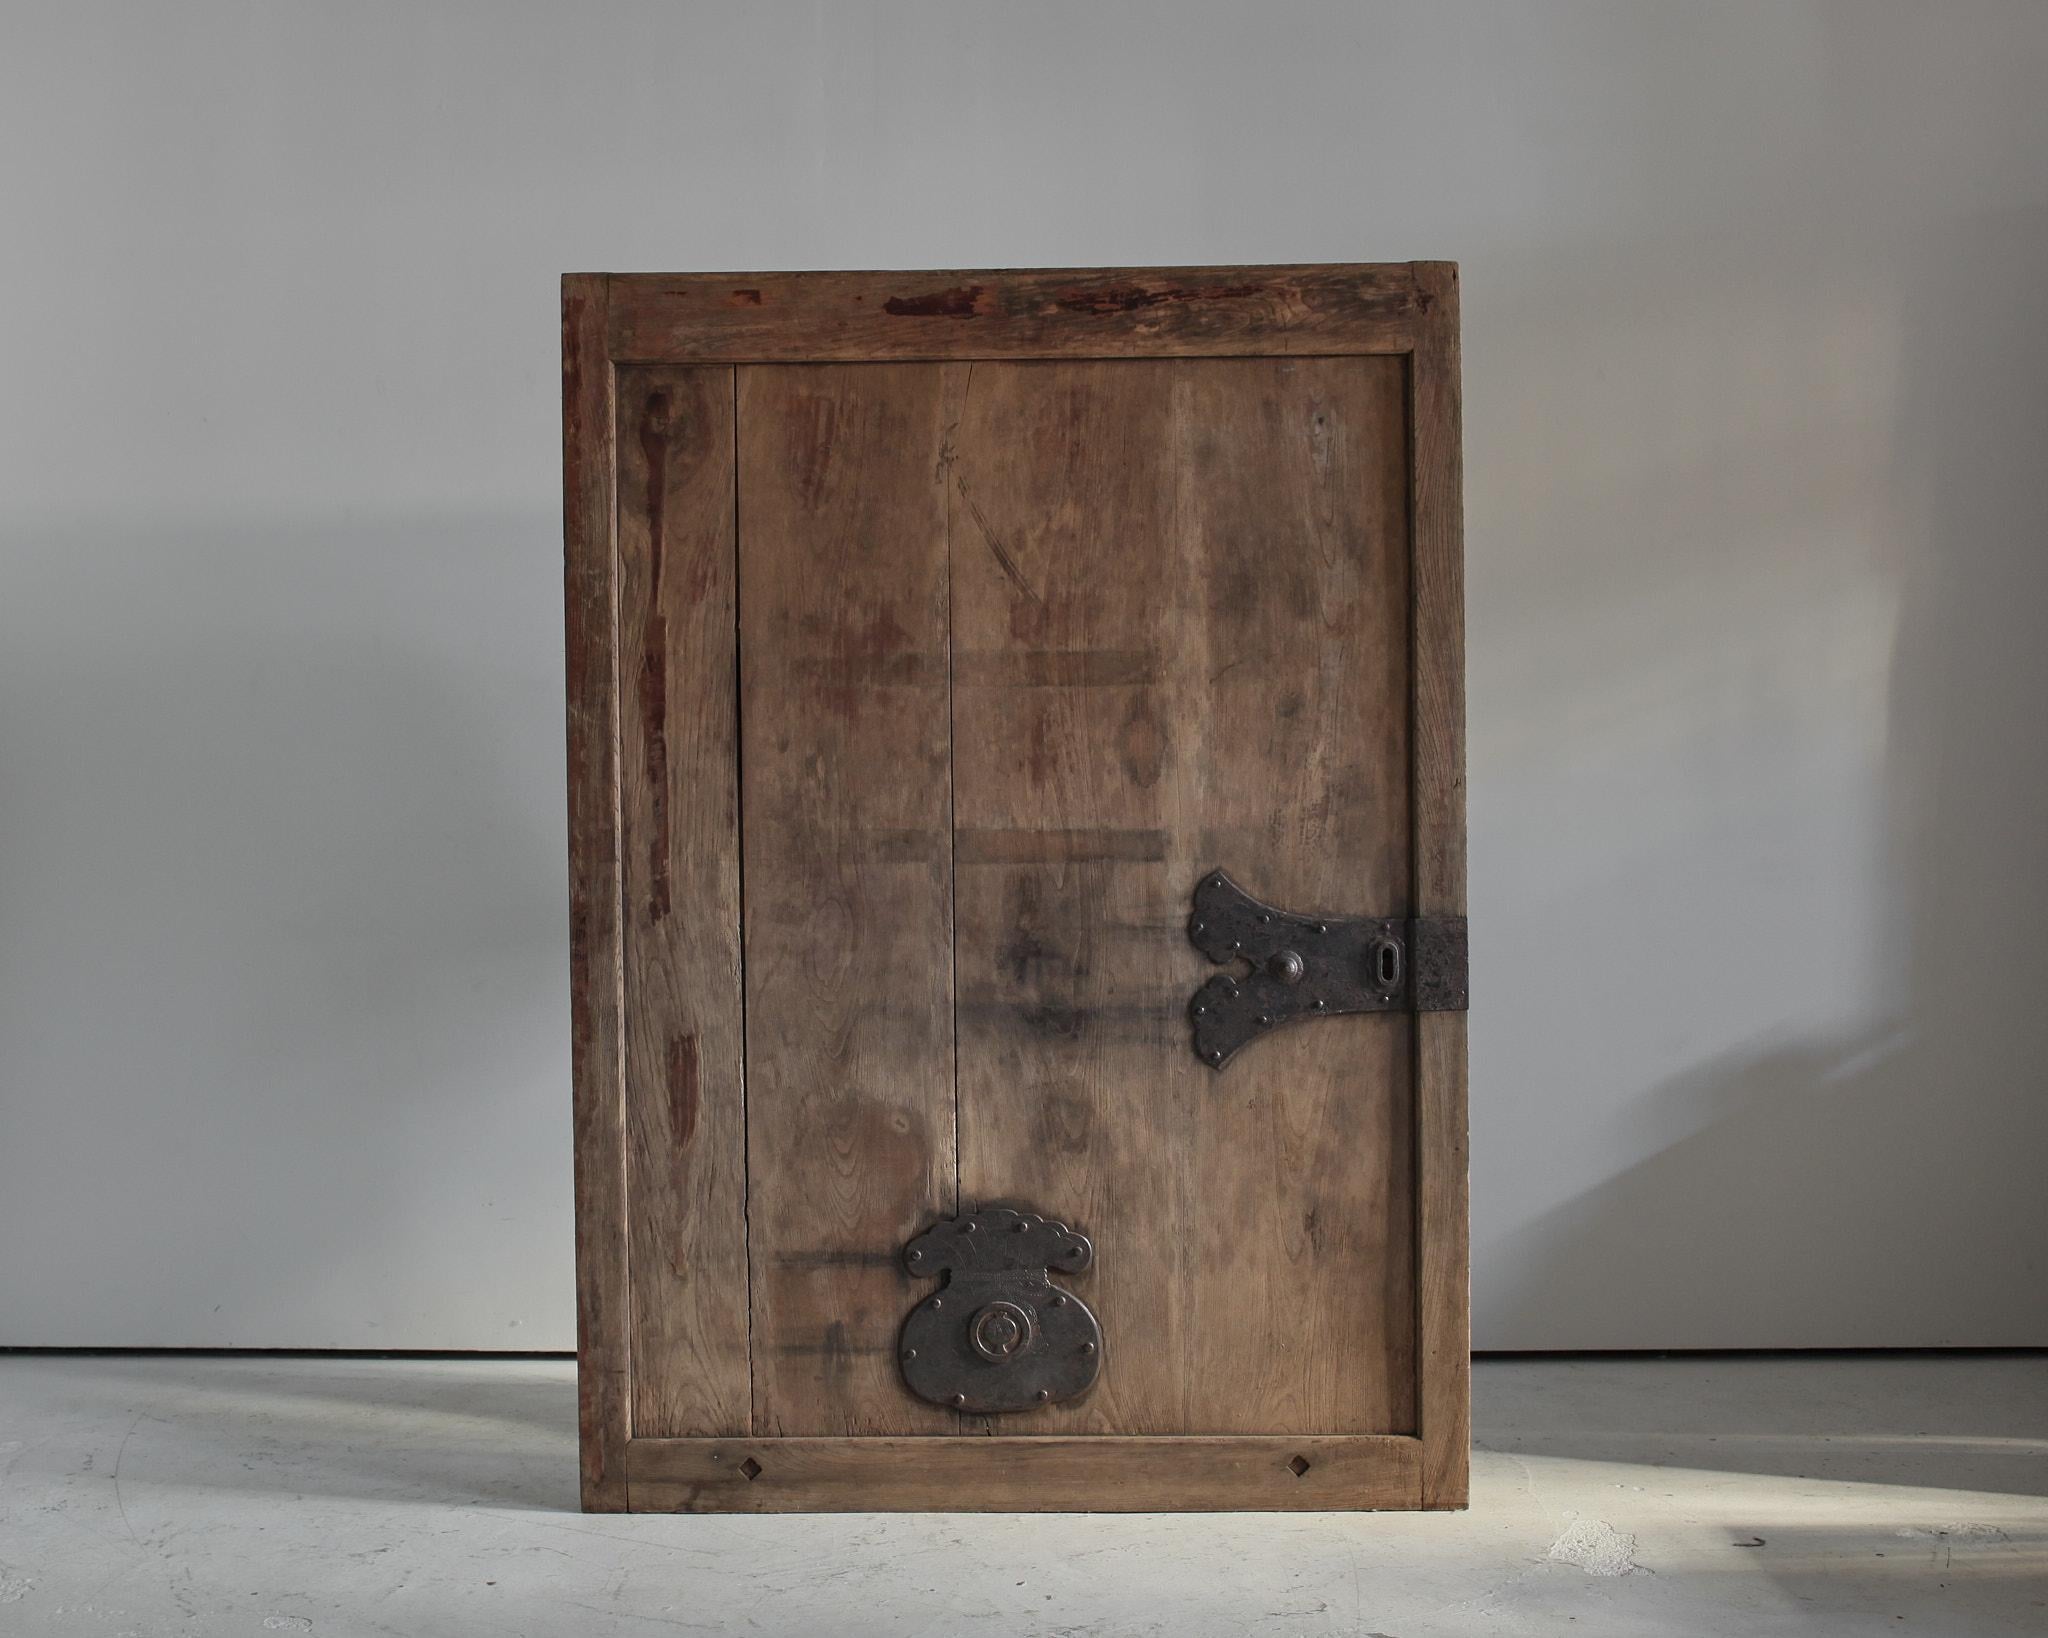 A huge early 19th C. Japanese Kura door in cedar.

Beautifully patinated bleached-out wood with hand forged wrought iron plaque/lock.

Can either be used as a door or a large art work.